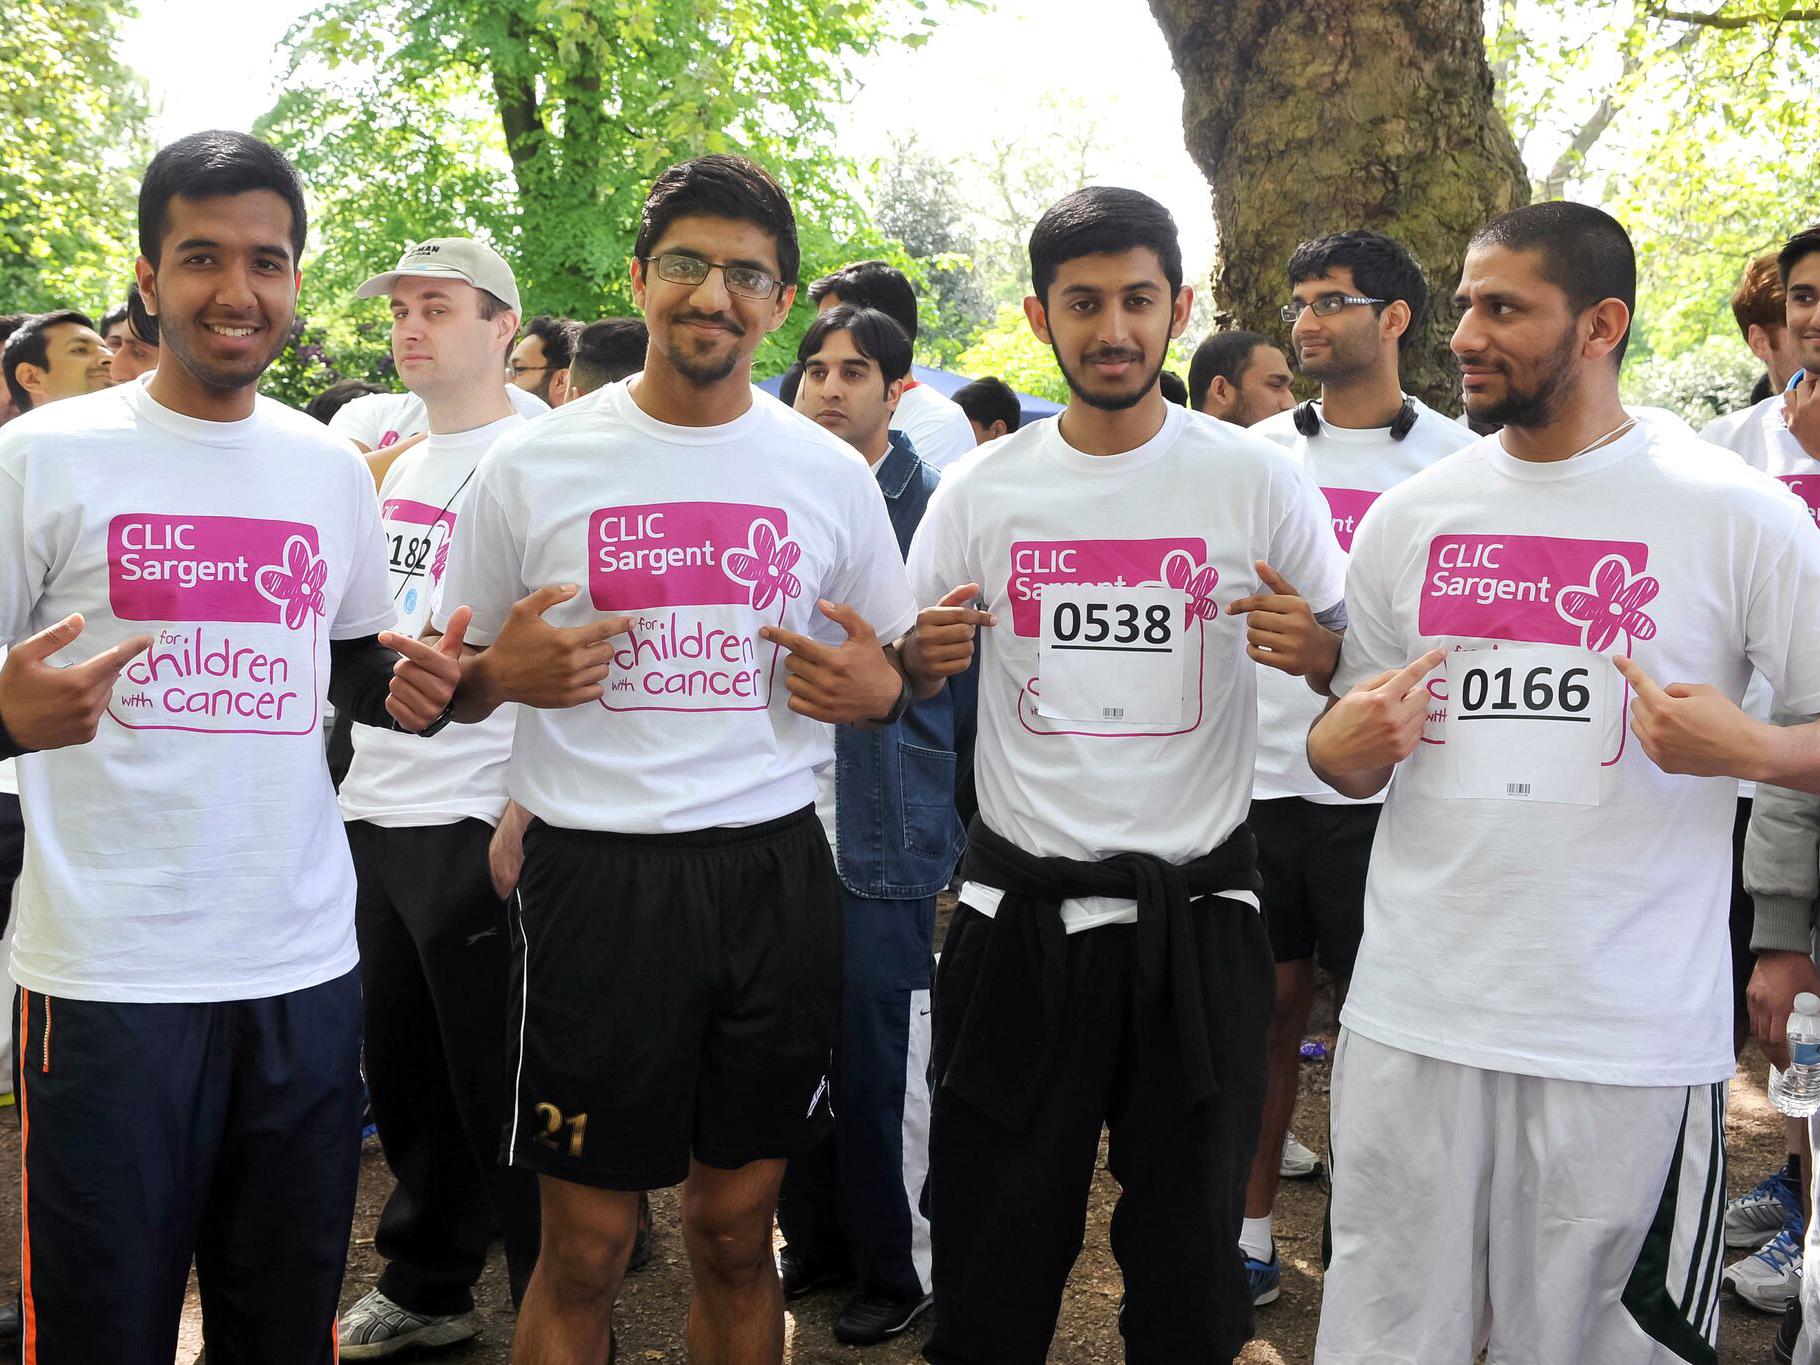 Muslim youth group combating Islamophobia by raising £500,000 for charity with single event